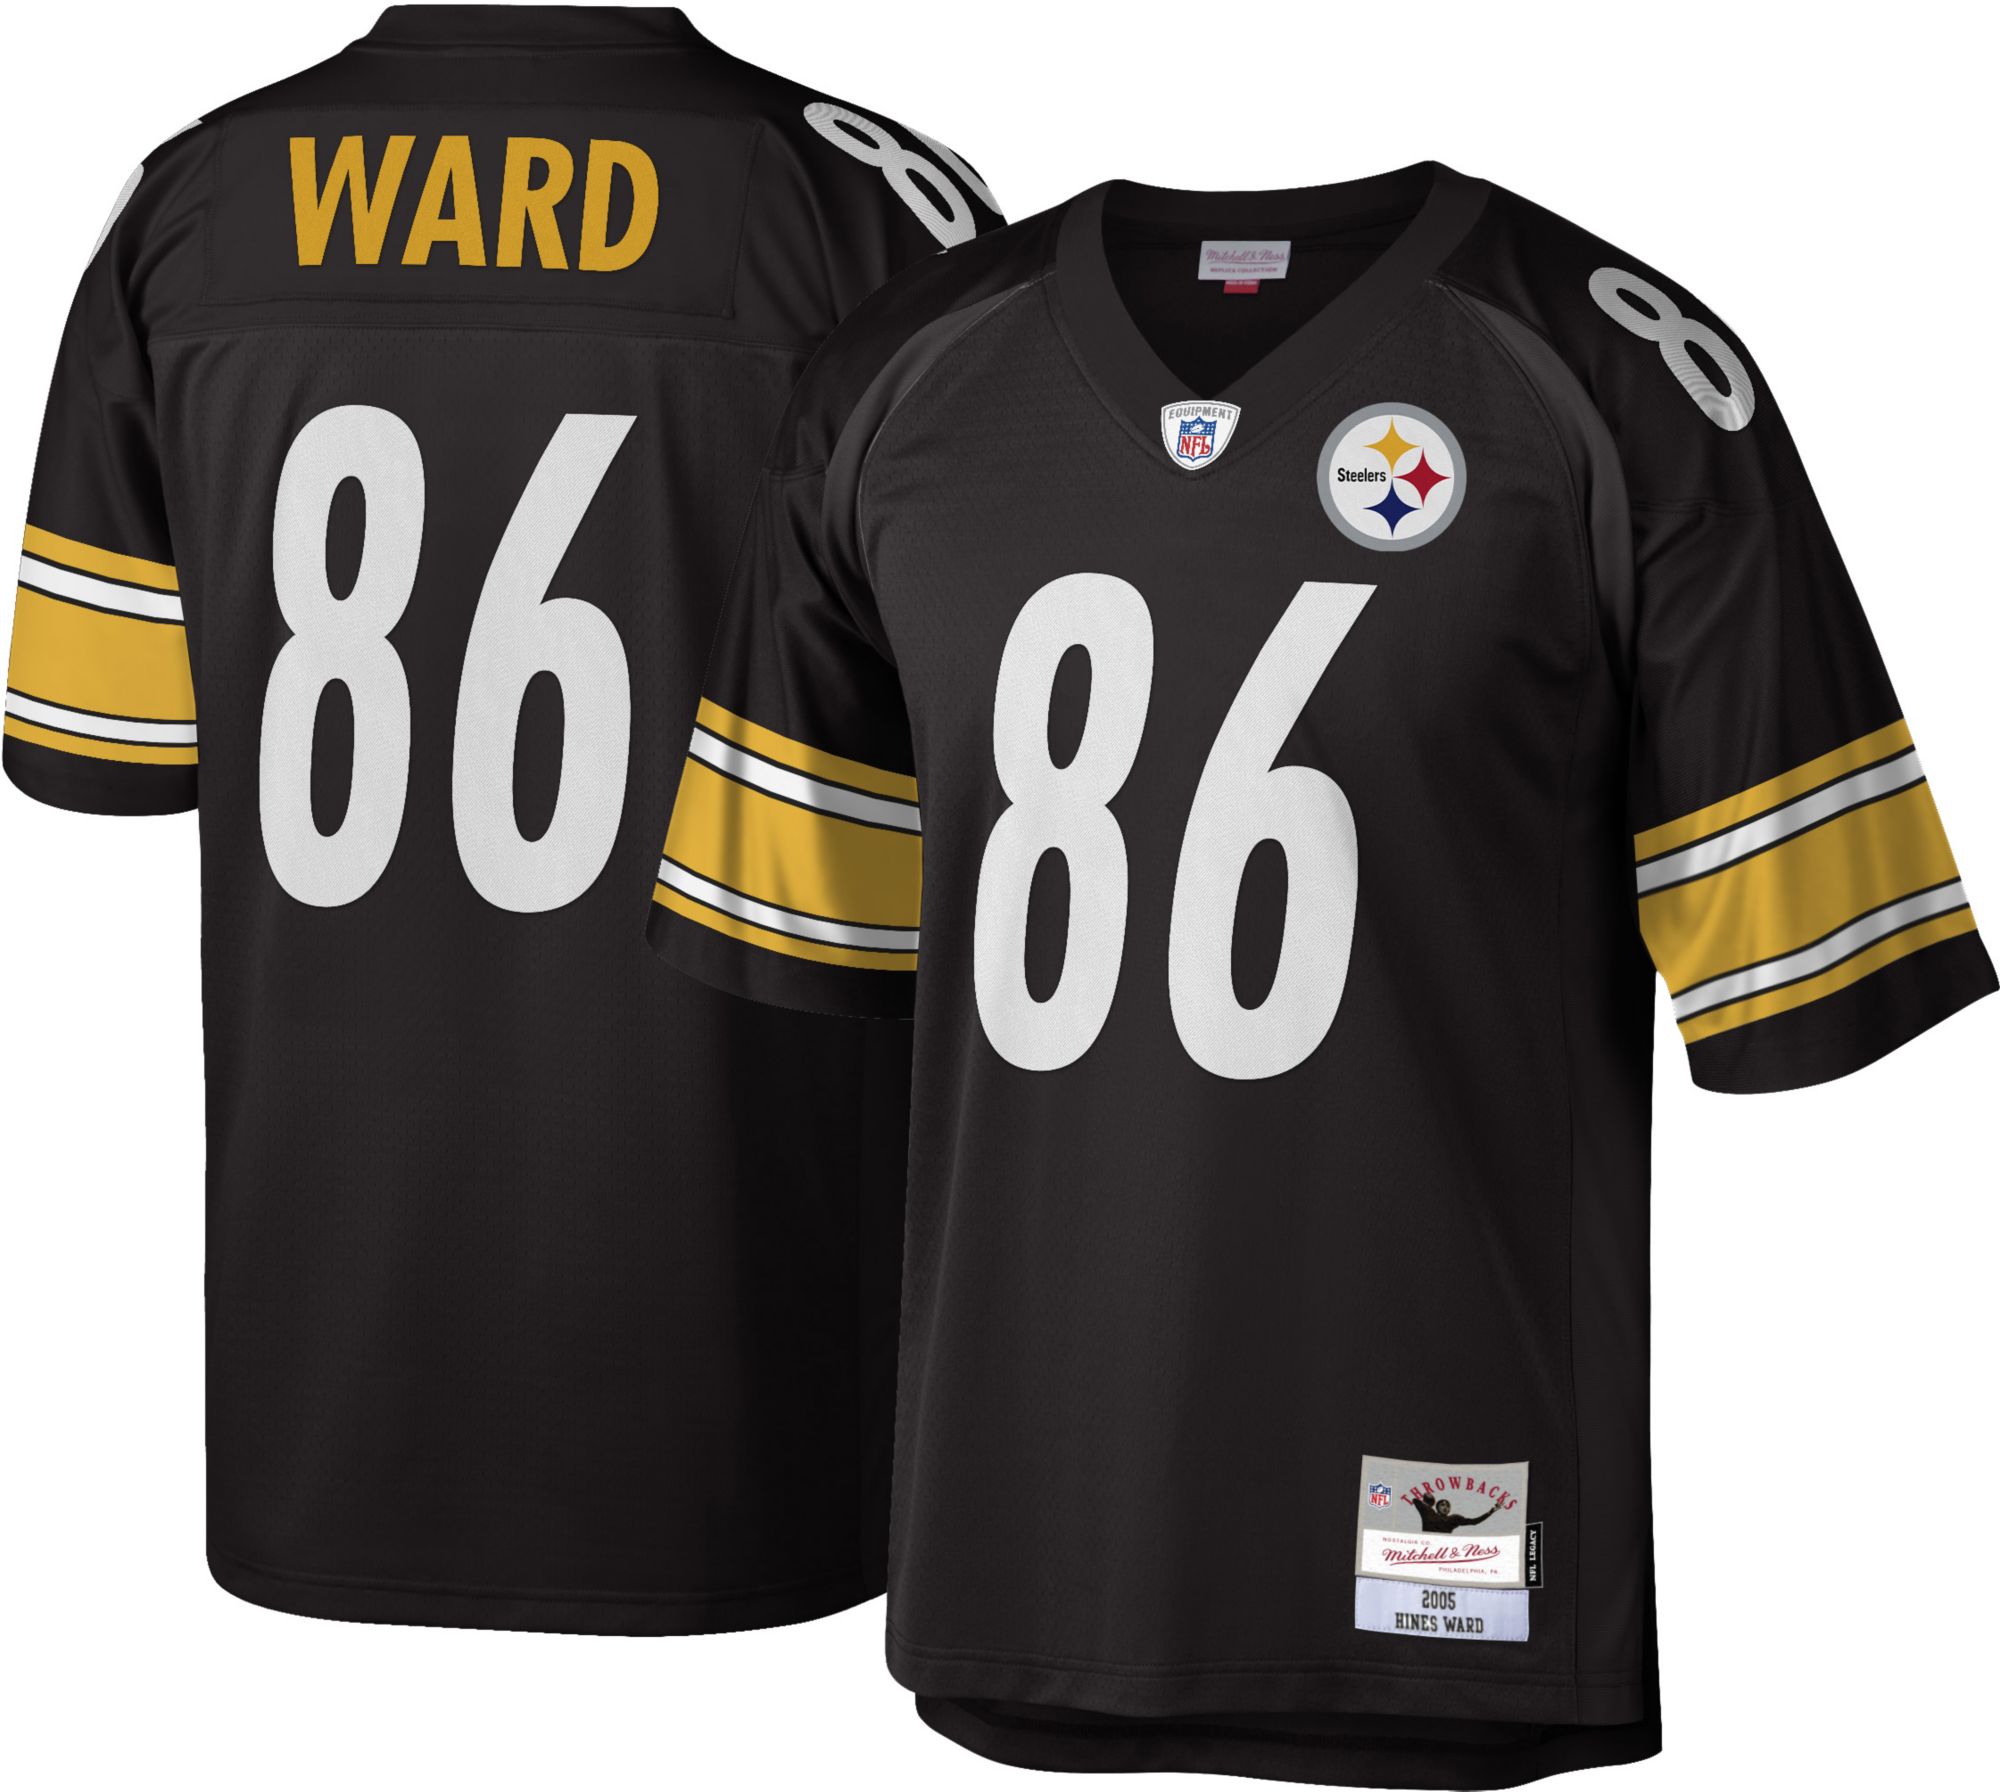 Nike Pittsburgh Steelers No86 Hines Ward Gold 1933s Throwback Men's Embroidered NFL Elite Jersey